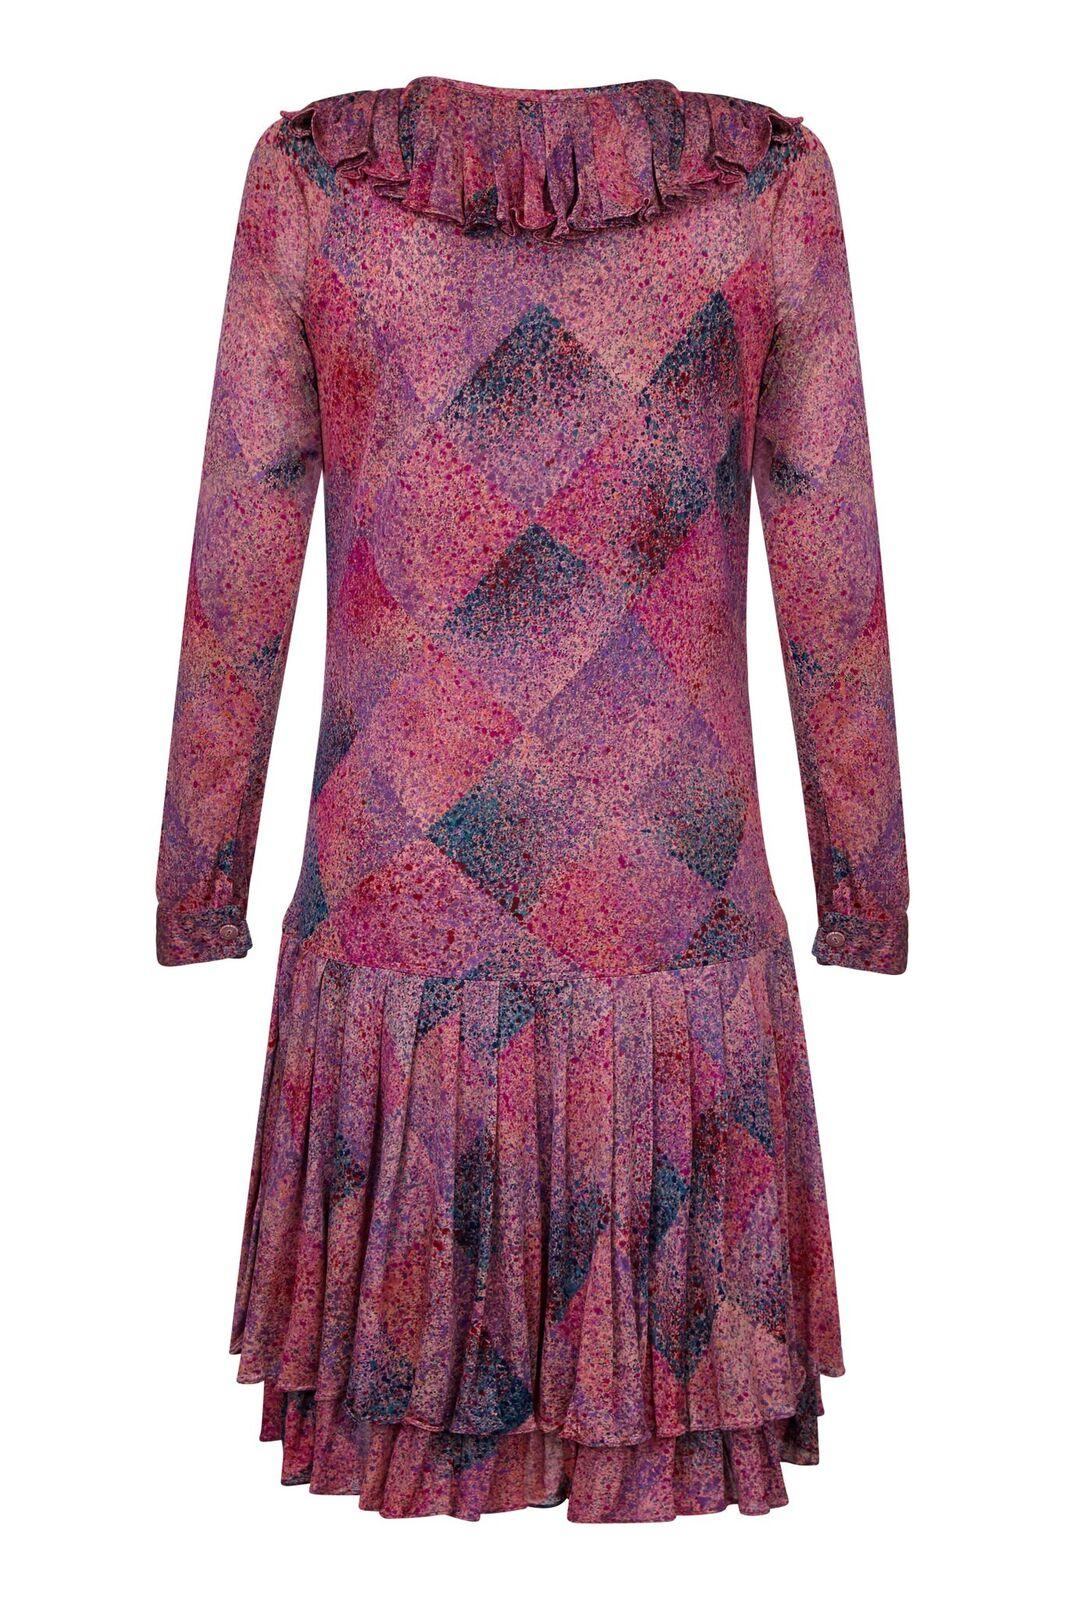 This charming 1970s silk harlequin print dress by Missoni showcases an unusual print and is in beautiful condition. The silk jersey has a subtle mottle effect harlequin print in soft shades of lilac, rose pink, navy and fuchsia and is styled with a